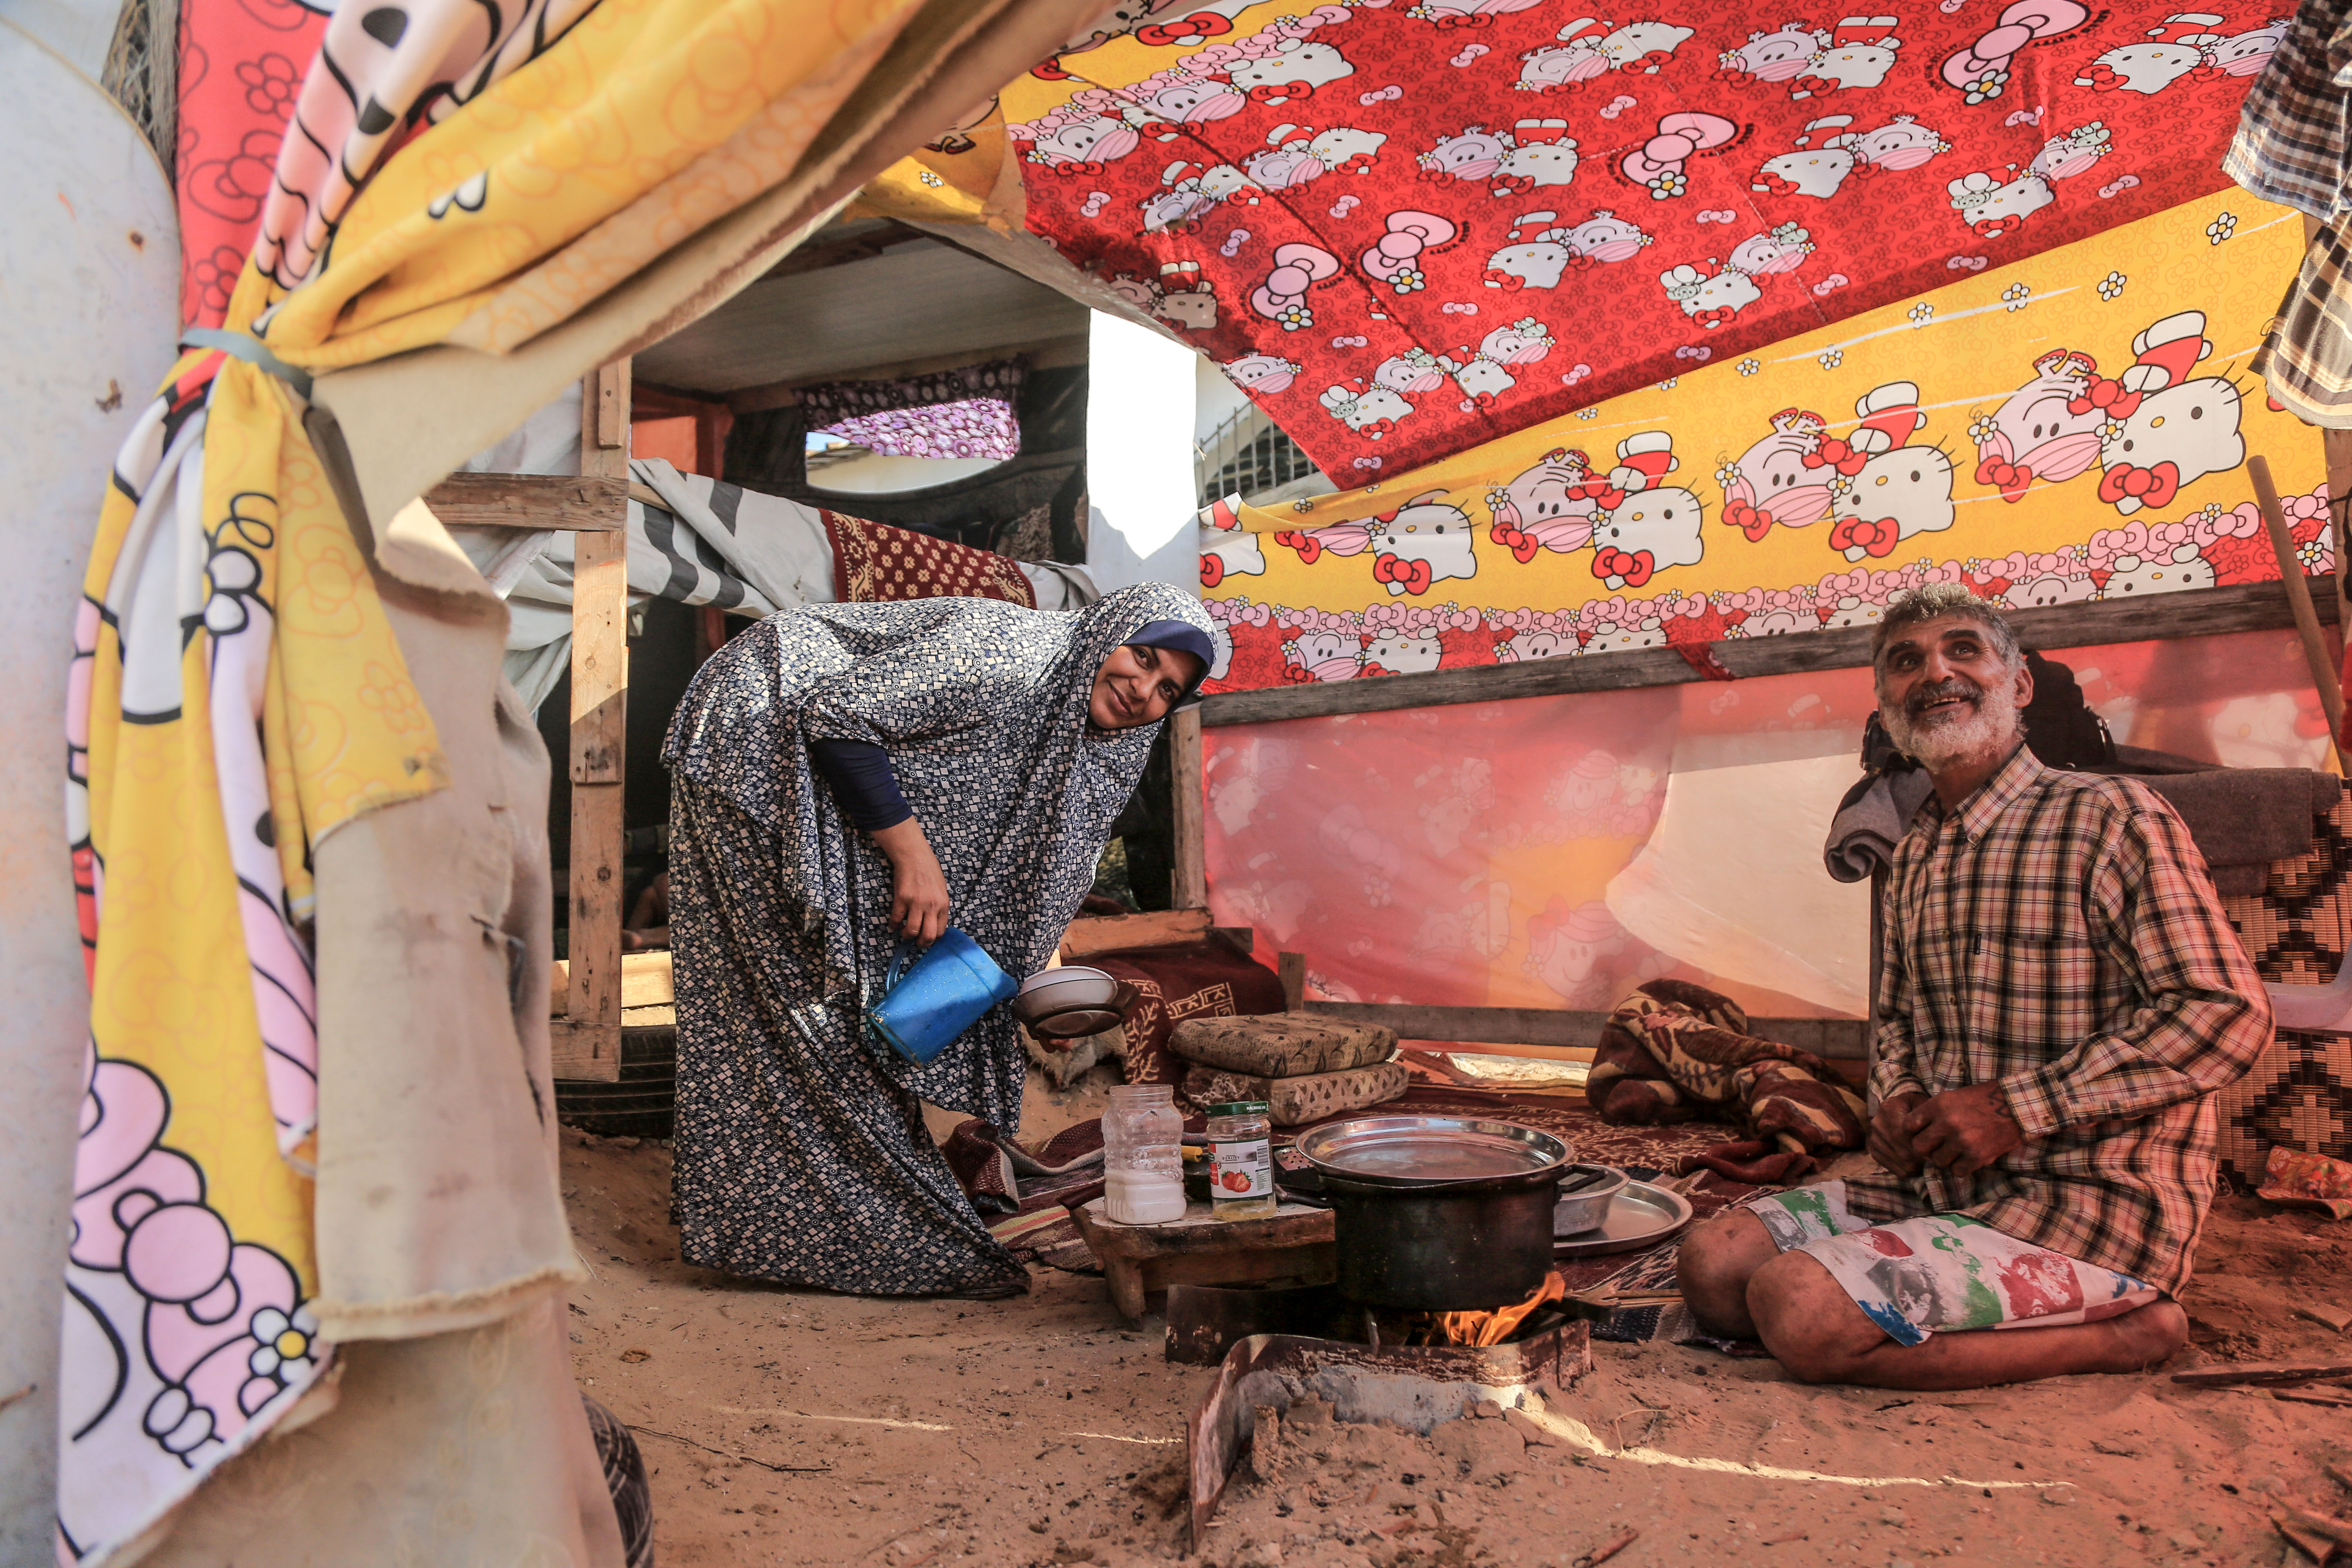 Umm Ahmad prepares iftar inside her tent. She cooks on scraps of wood that her husband Hani collects from the streets of Gaza. The al-Lahham family has been living in this makeshift tent for three years.